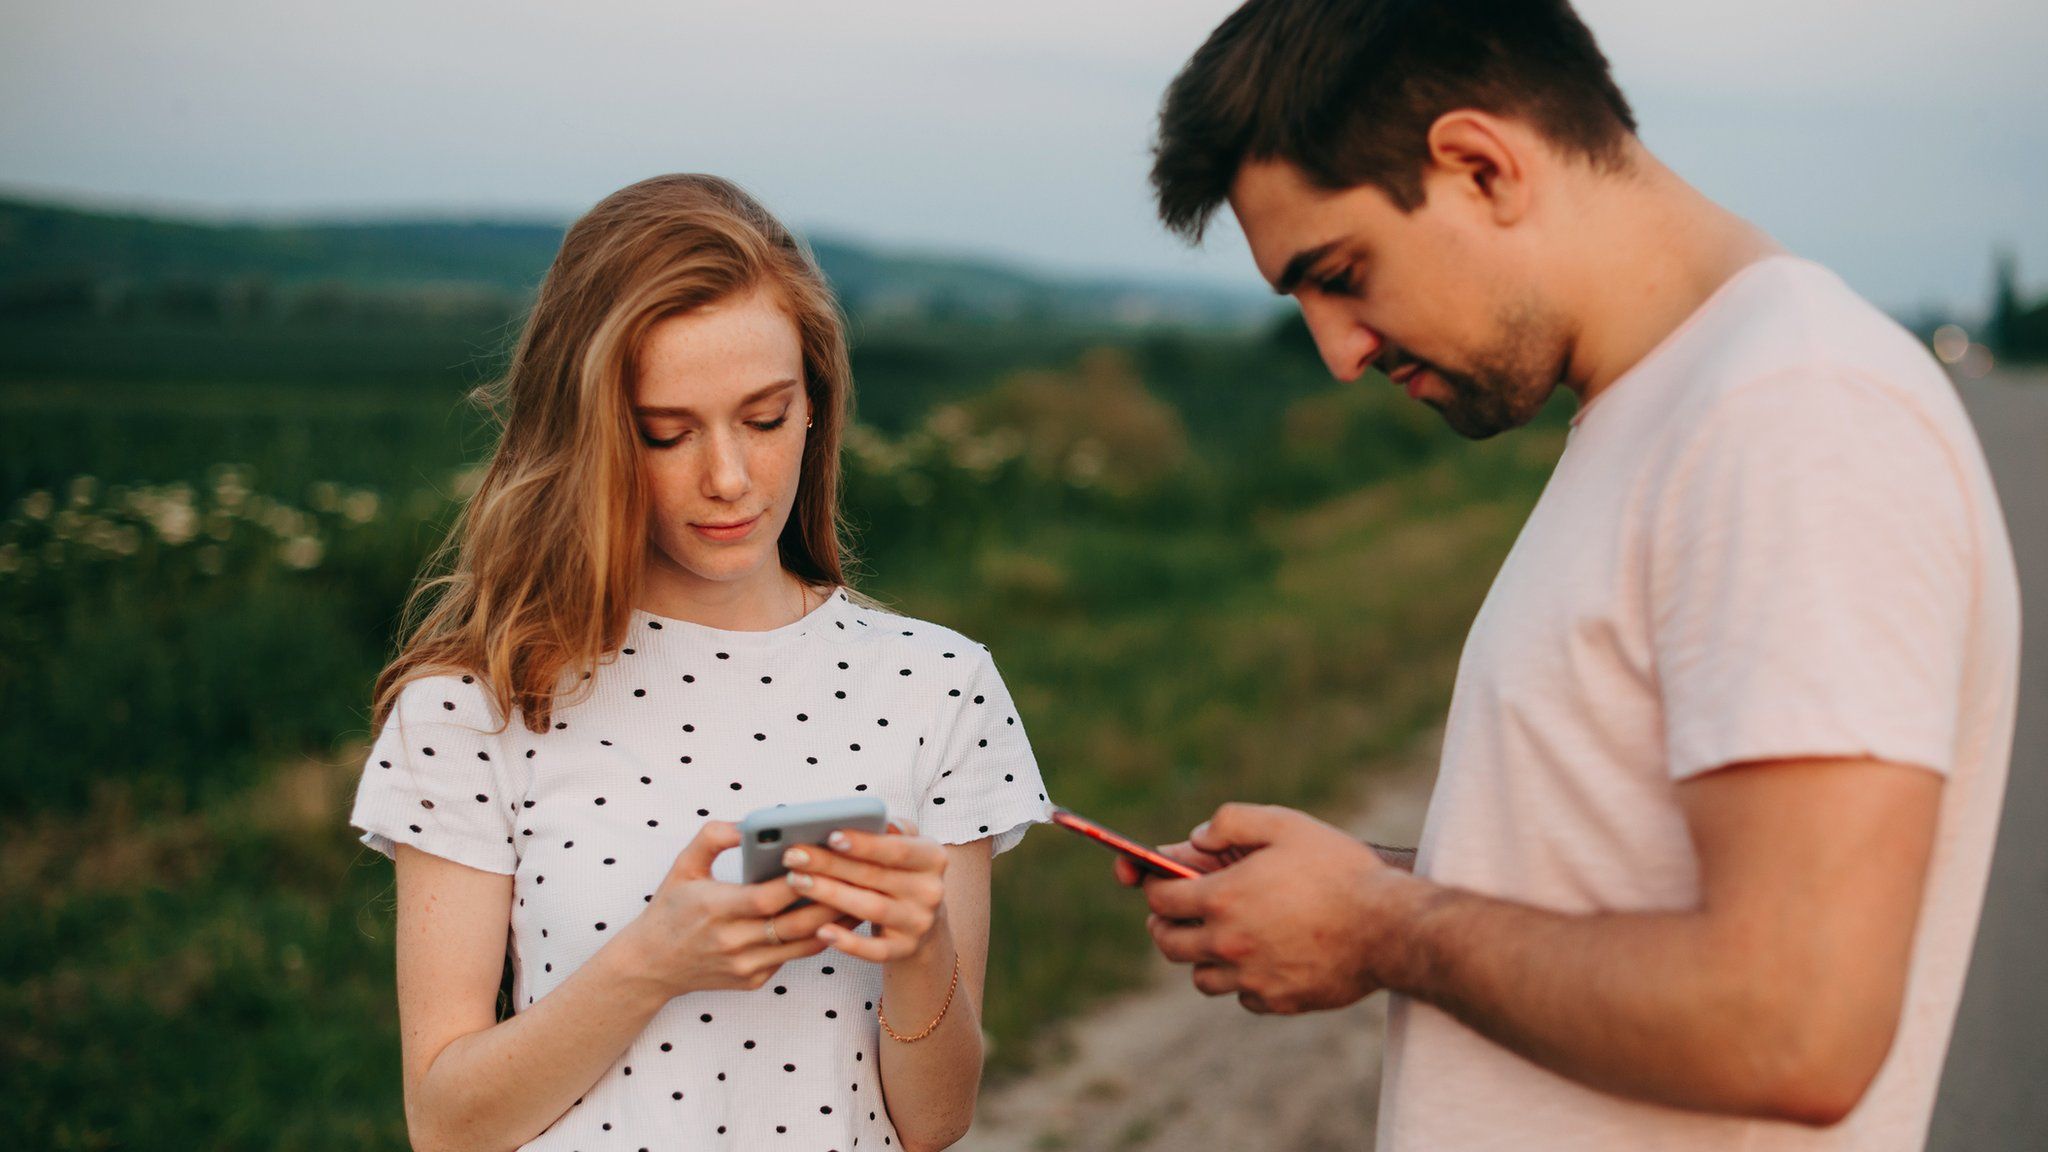 Man and woman looking at mobile phones